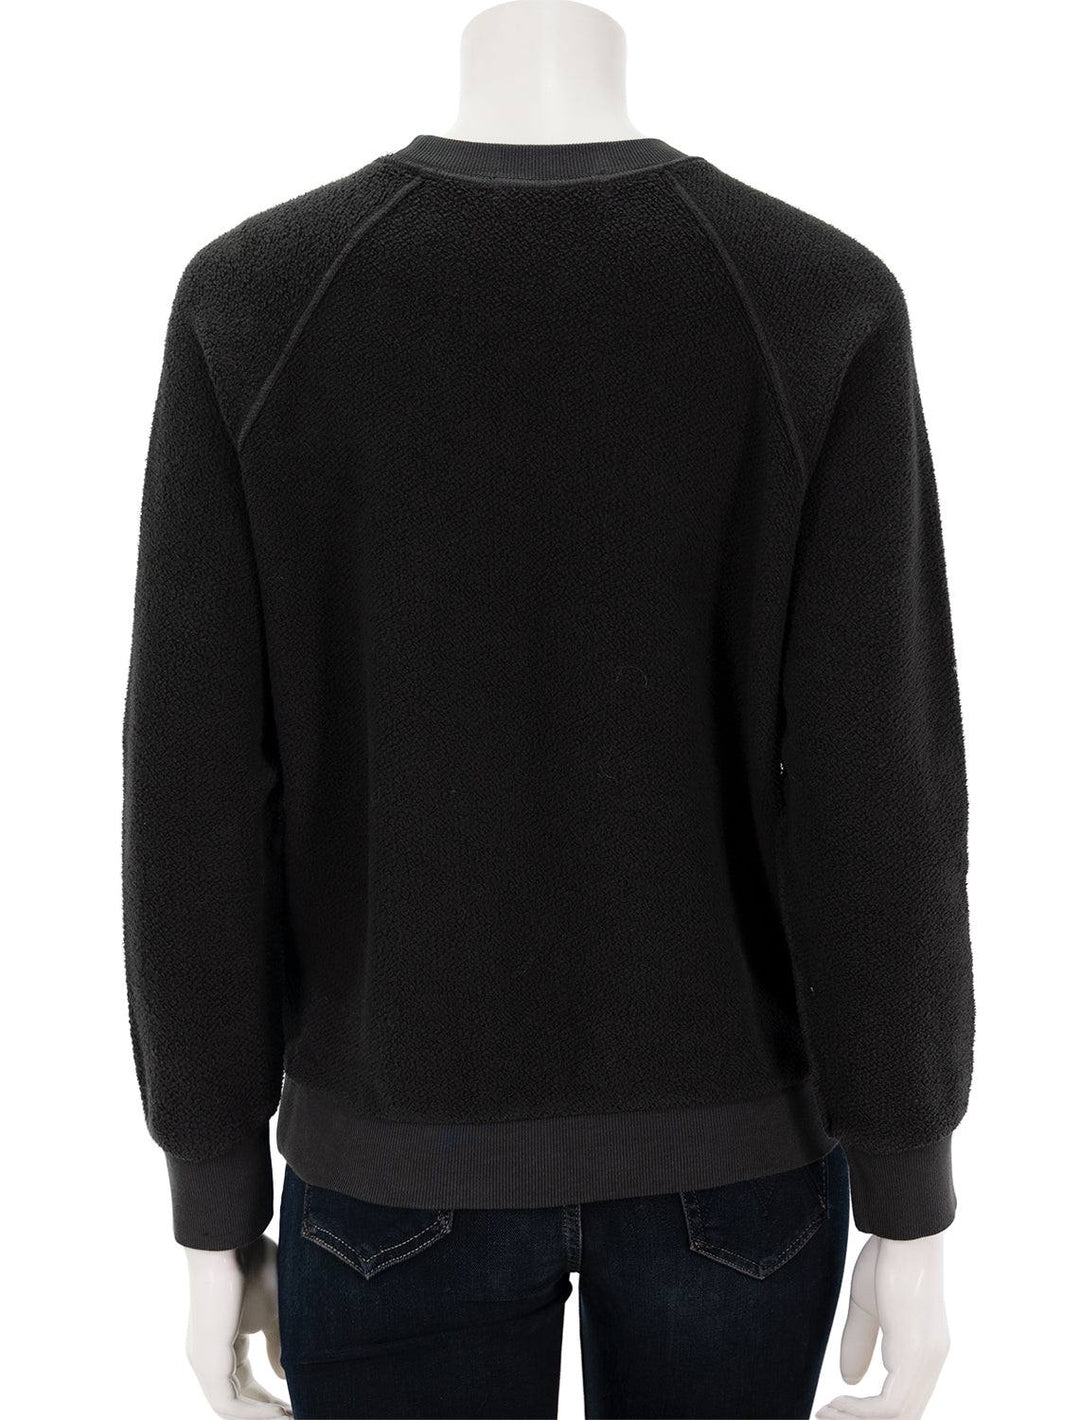 Back view of Perfectwhitetee's ziggy inside out sweatshirt in vintage black.